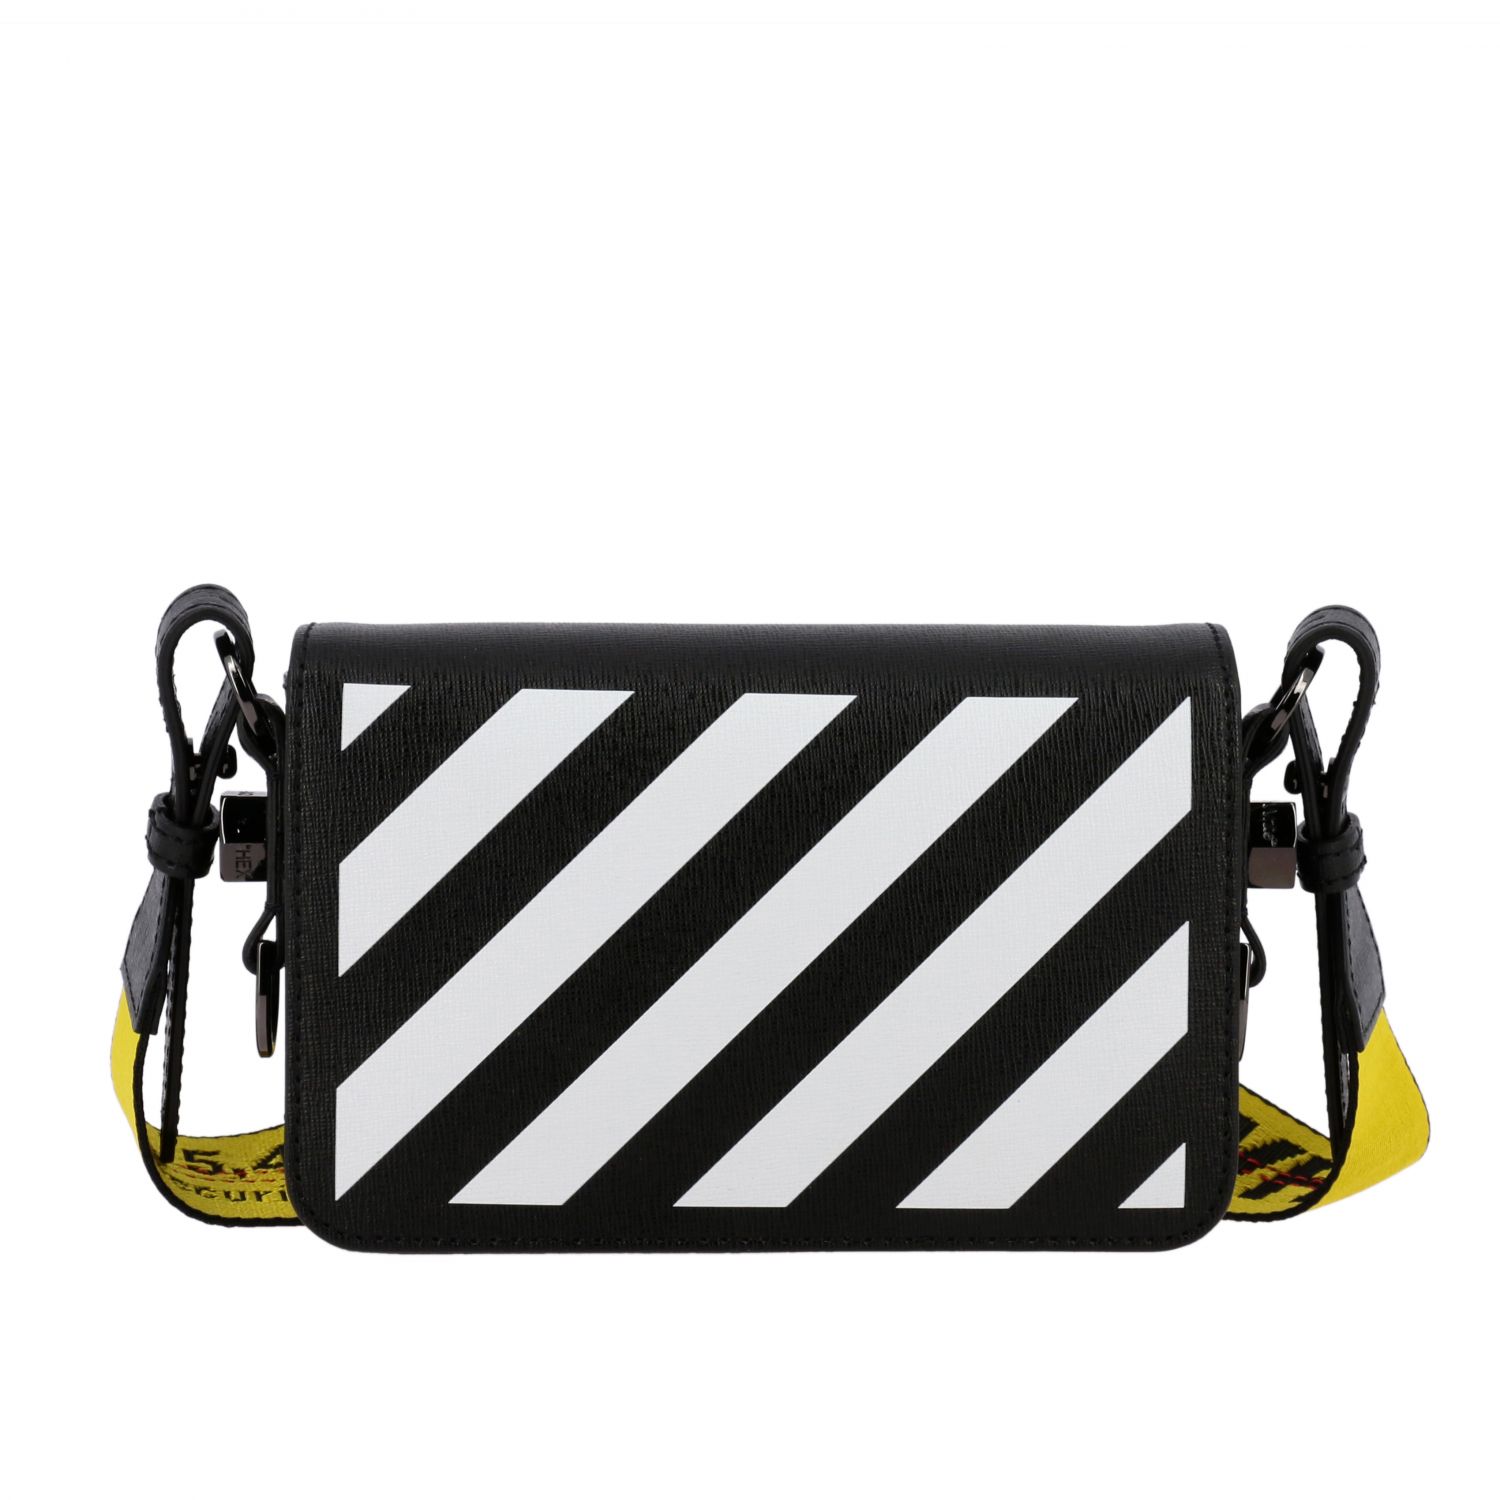 Off-White Outlet: Off White shoulder bag in saffiano leather with ...